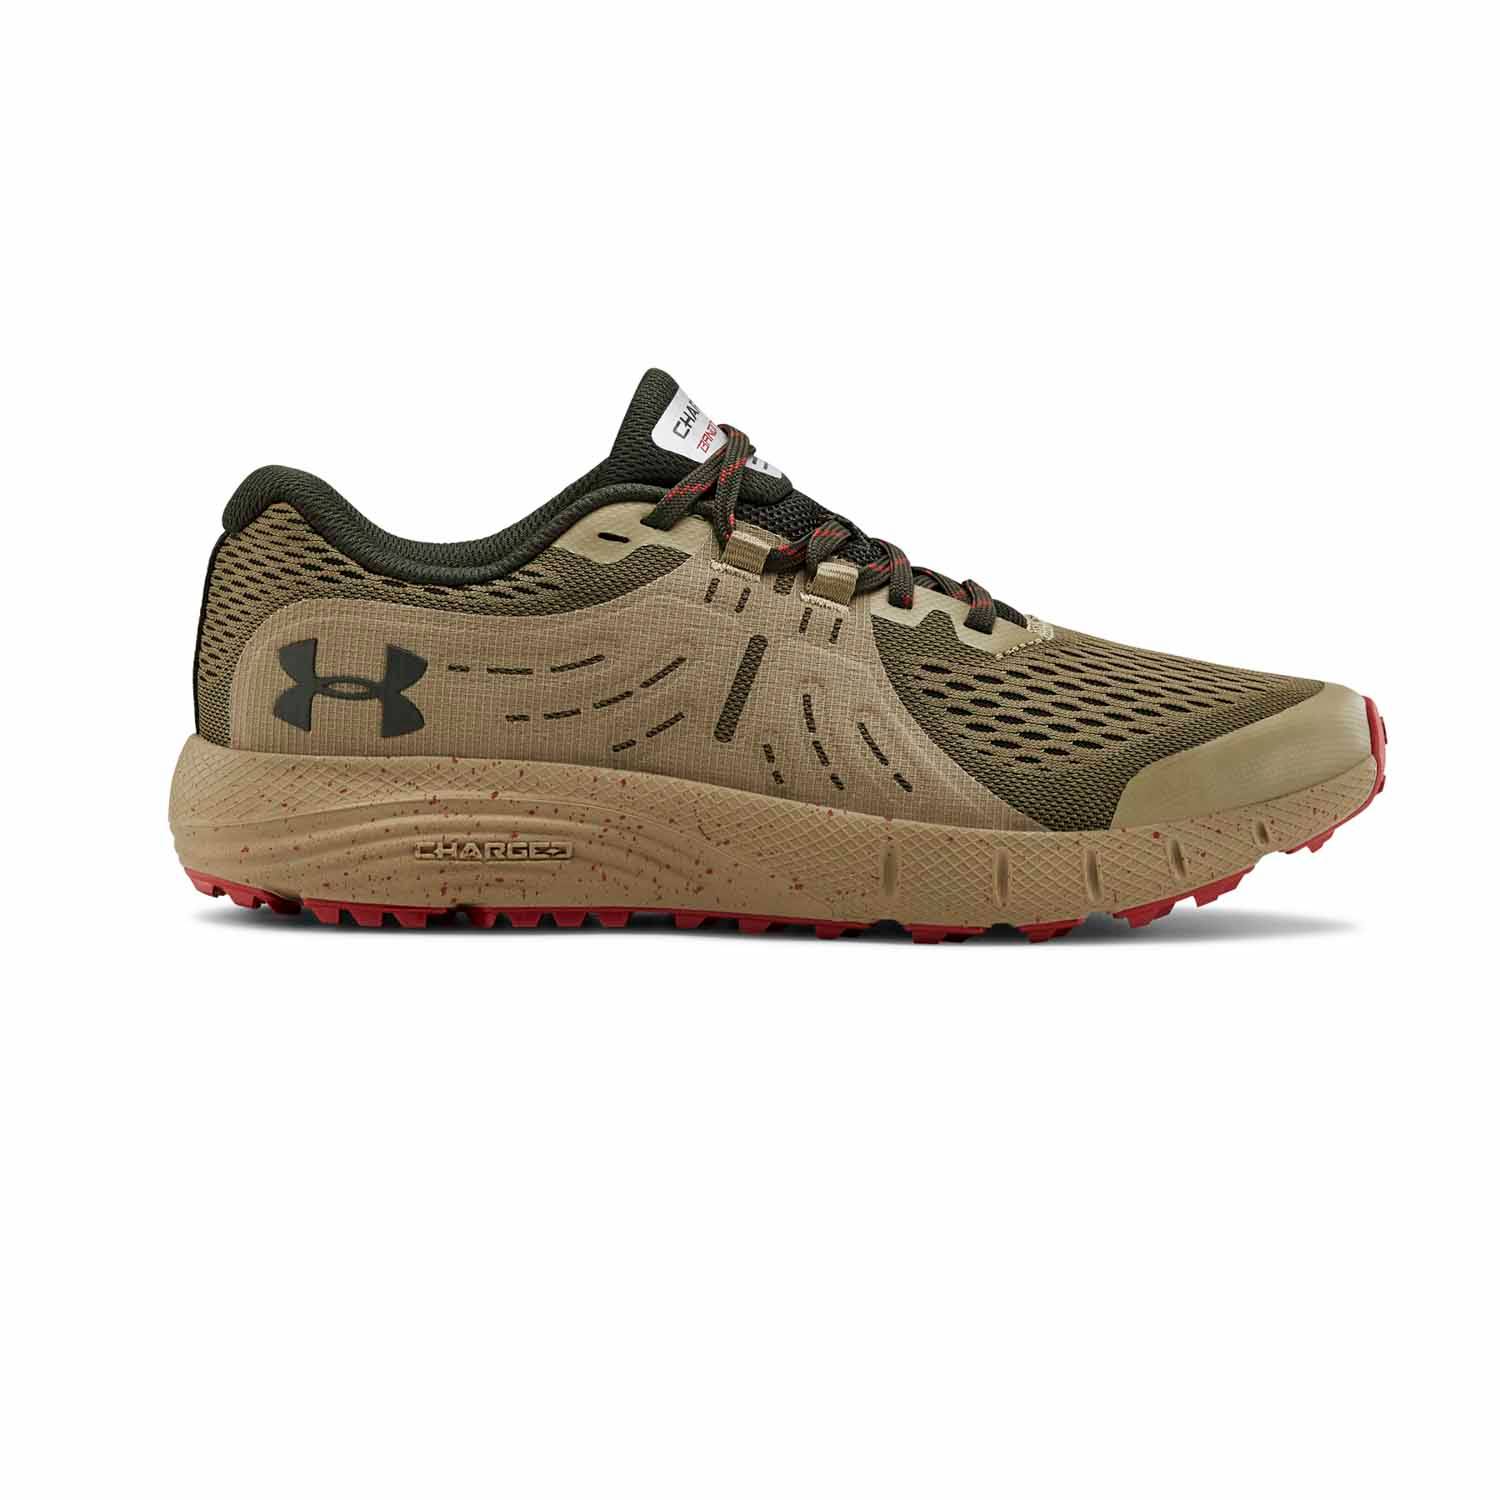 under armour charged training shoes